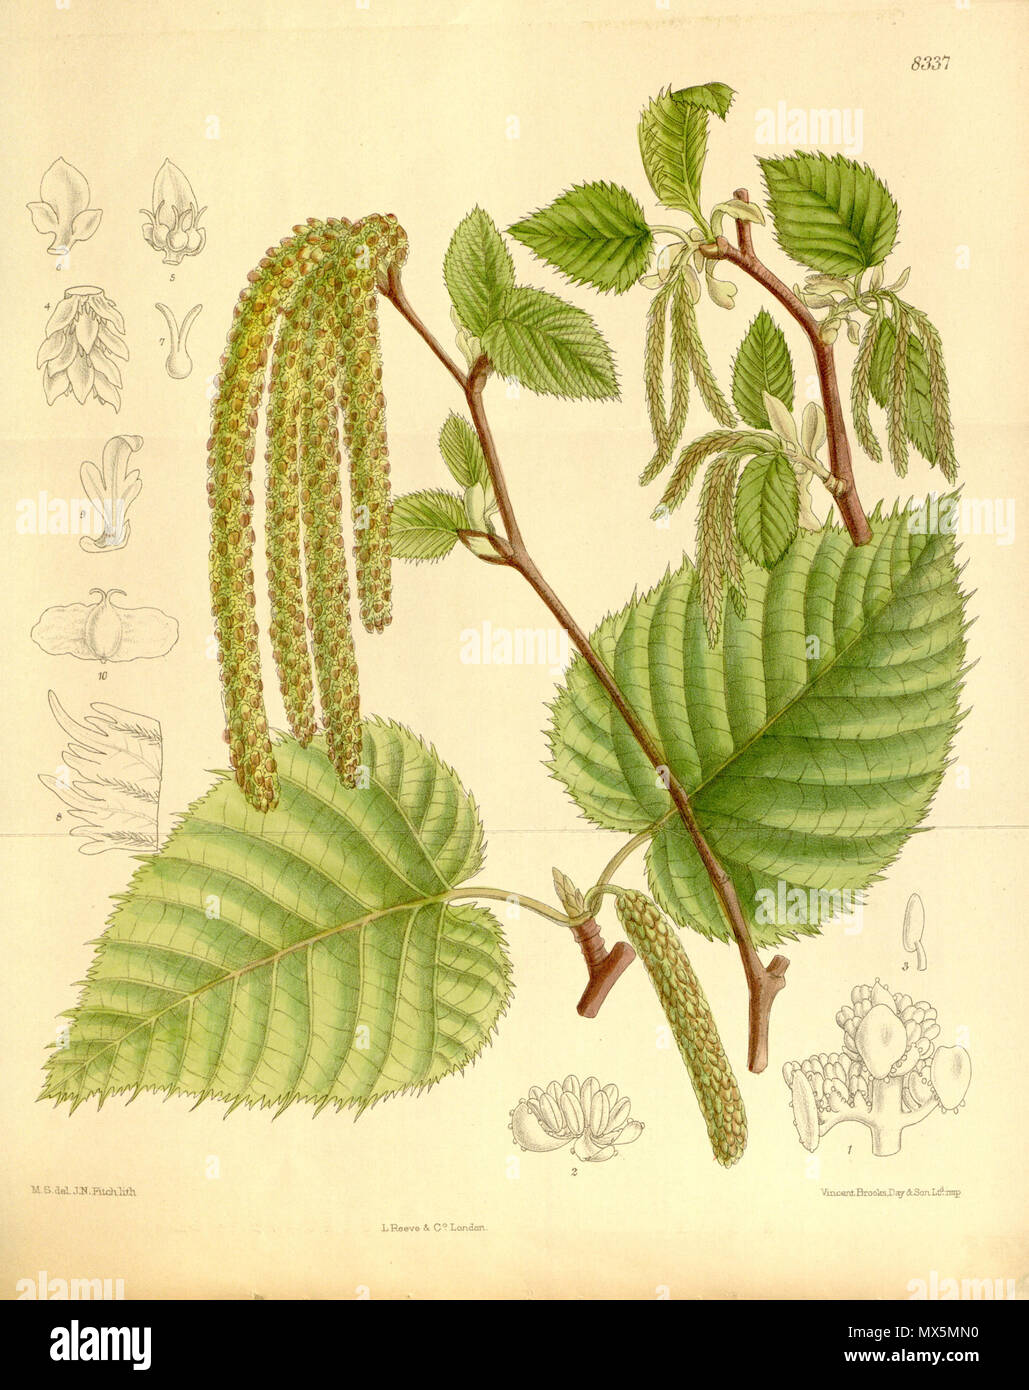 . Betula maximowiczii (= Betula maximowicziana), Betulaceae . 1910. M.S. del., J.N.Fitch lith. 83 Betula maximowiczii 136-8337 Stock Photo